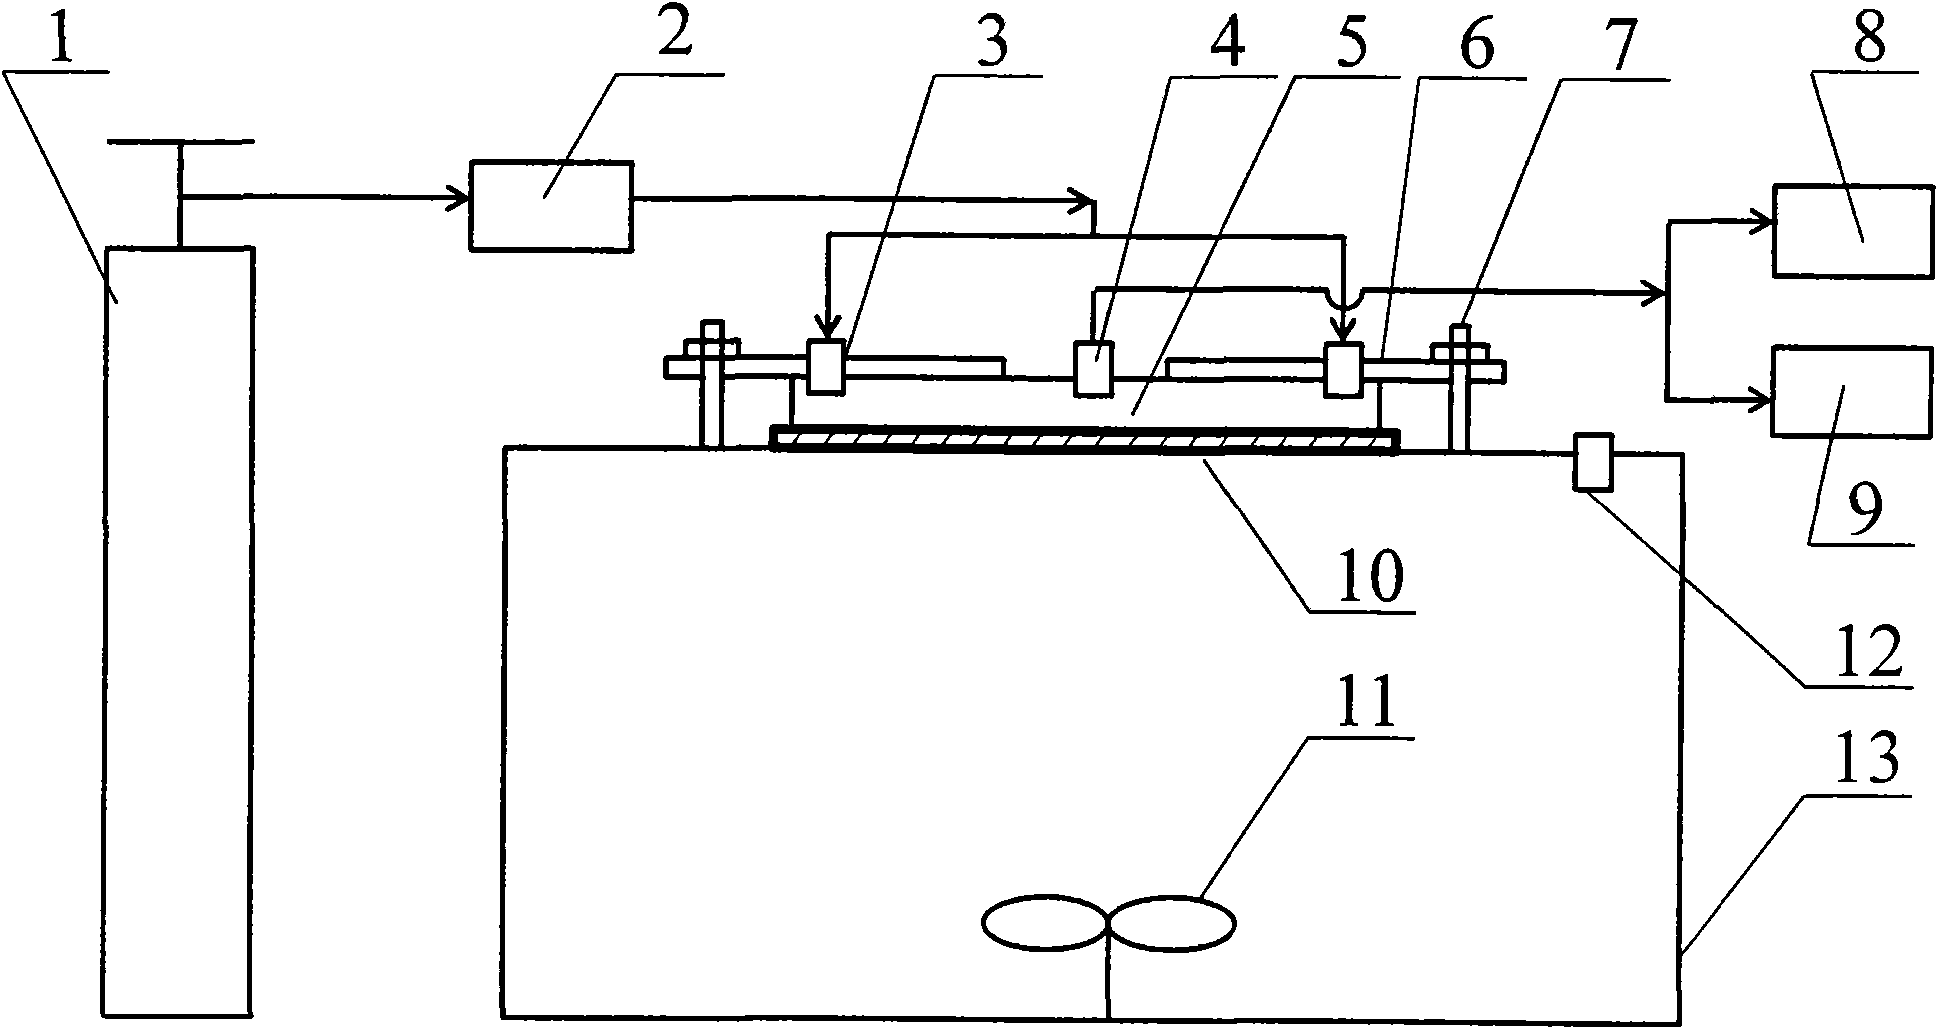 Experiment system for determining proton transfer characteristic parameters of building material surface barrier layer